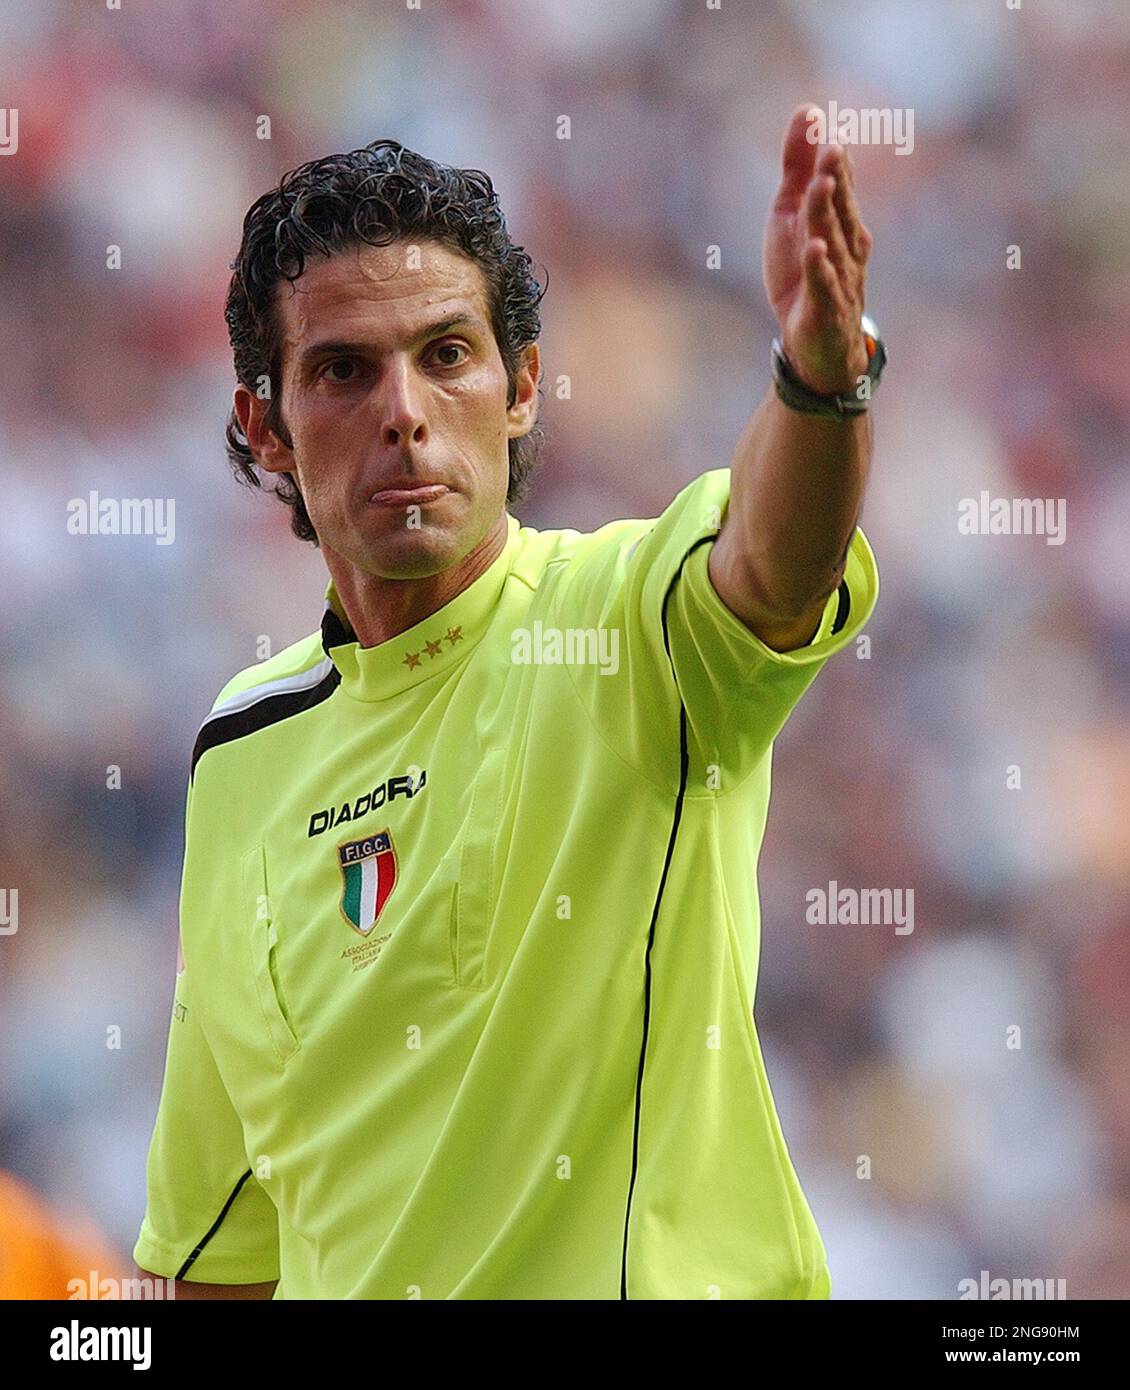 Referee Andrea De Marco during an Italian first division soccer match between AC Milan and AS Roma, at the San Siro stadium in Milan, Italy, Sunday, May 14, 2006. (AP Photo/Alberto Pellaschiar) Stock Photo